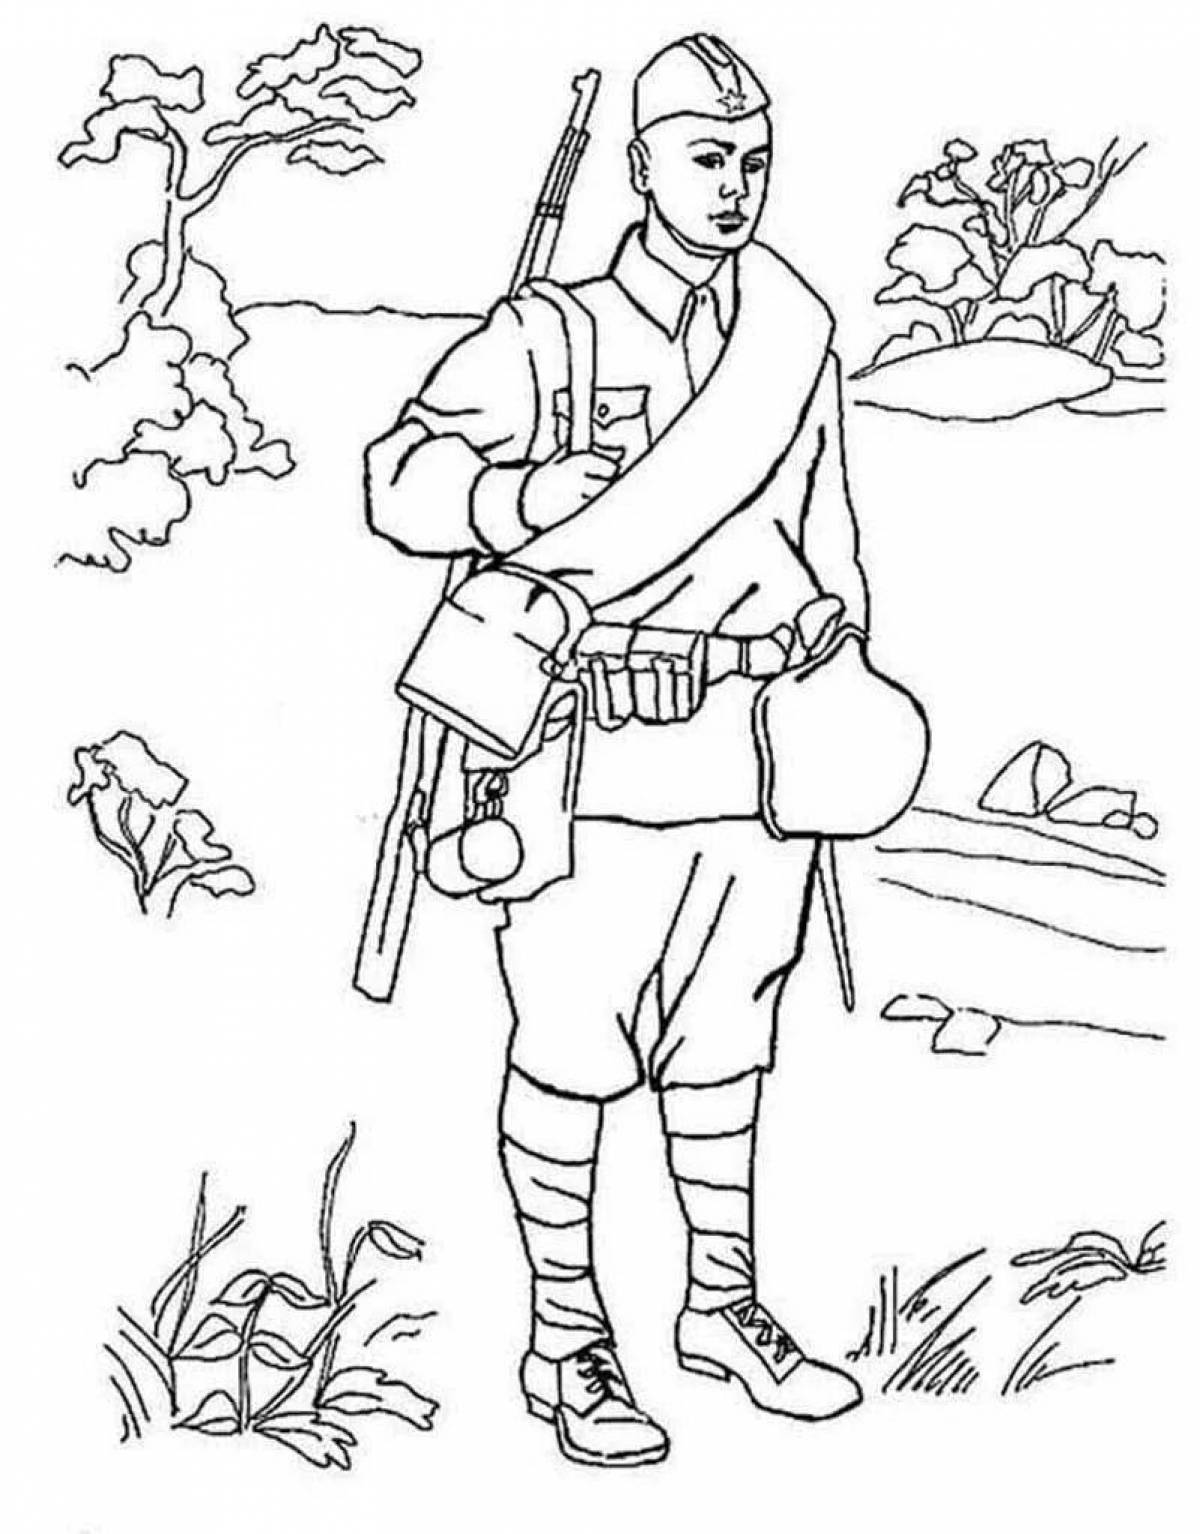 Coloring book fighting soldier of the ussr